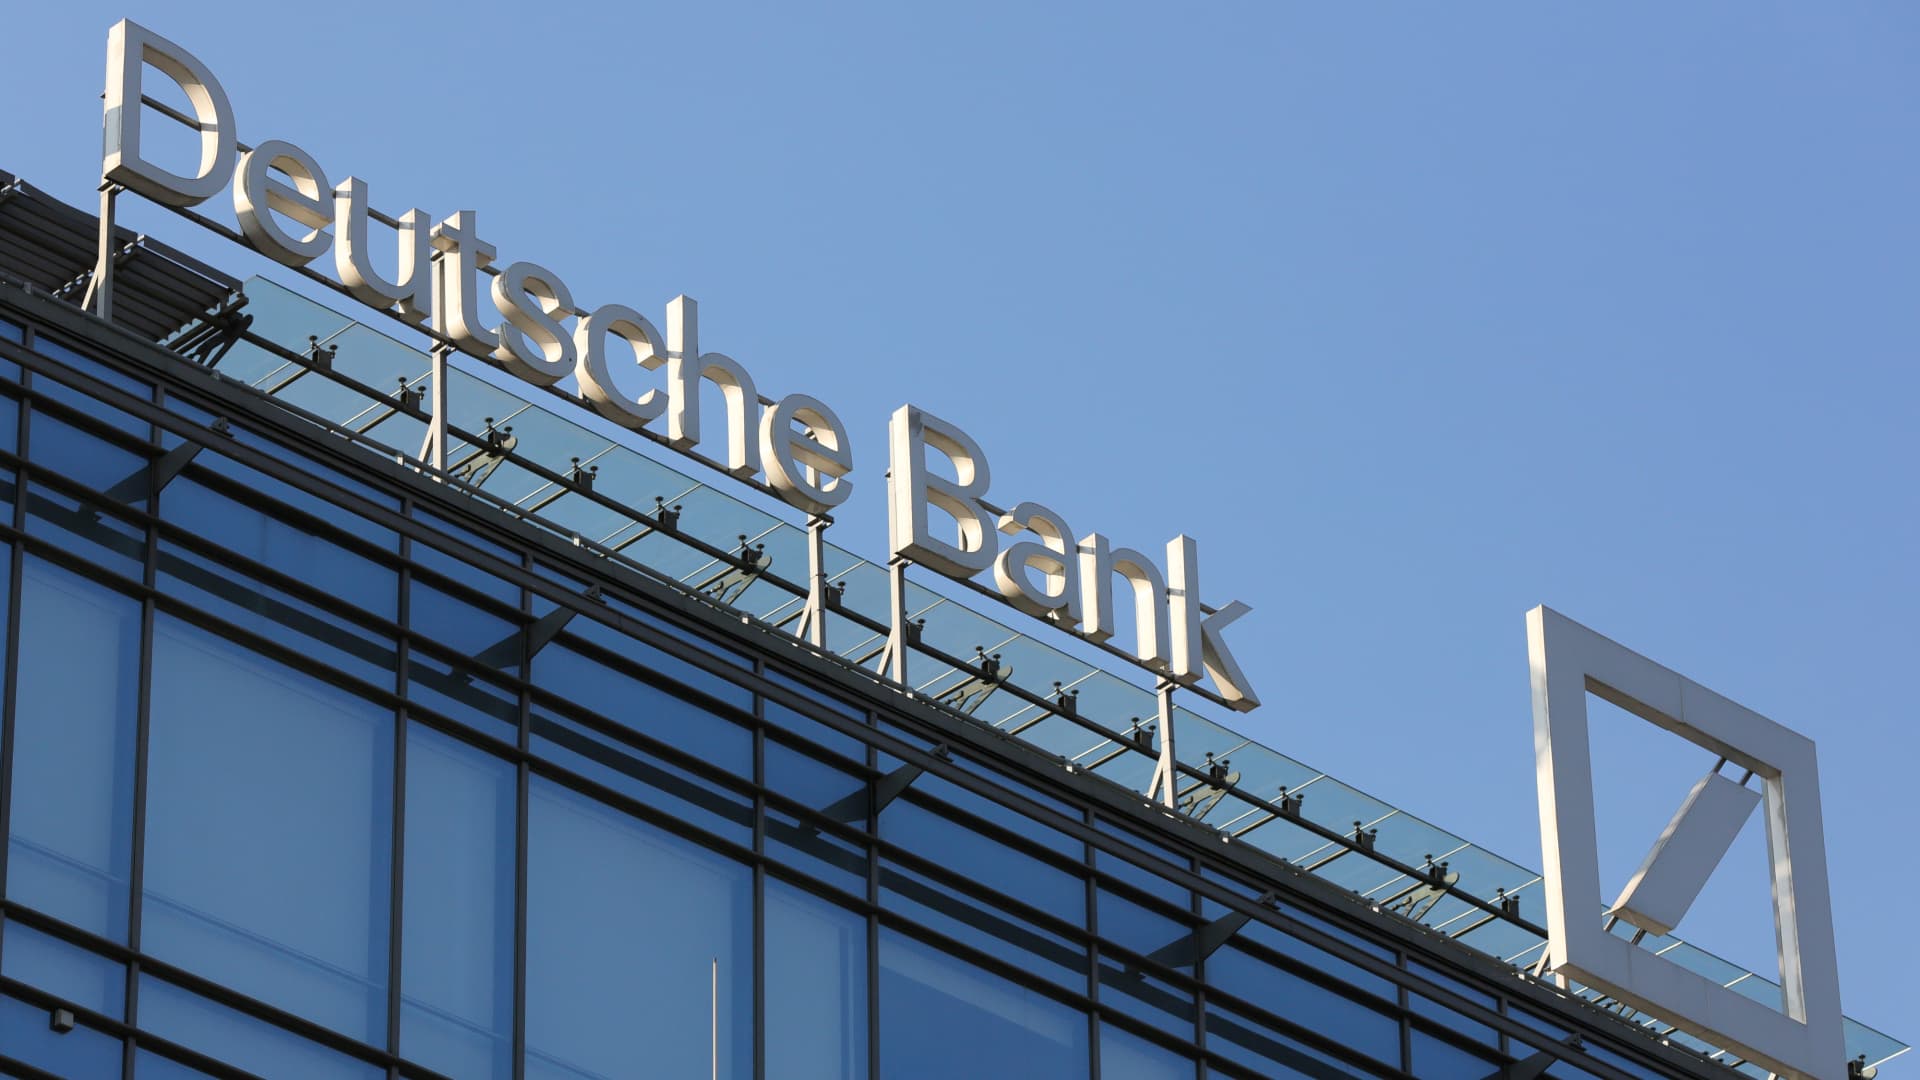 Deutsche Bank shares slide 13% after sudden spike in the cost of insuring against its default